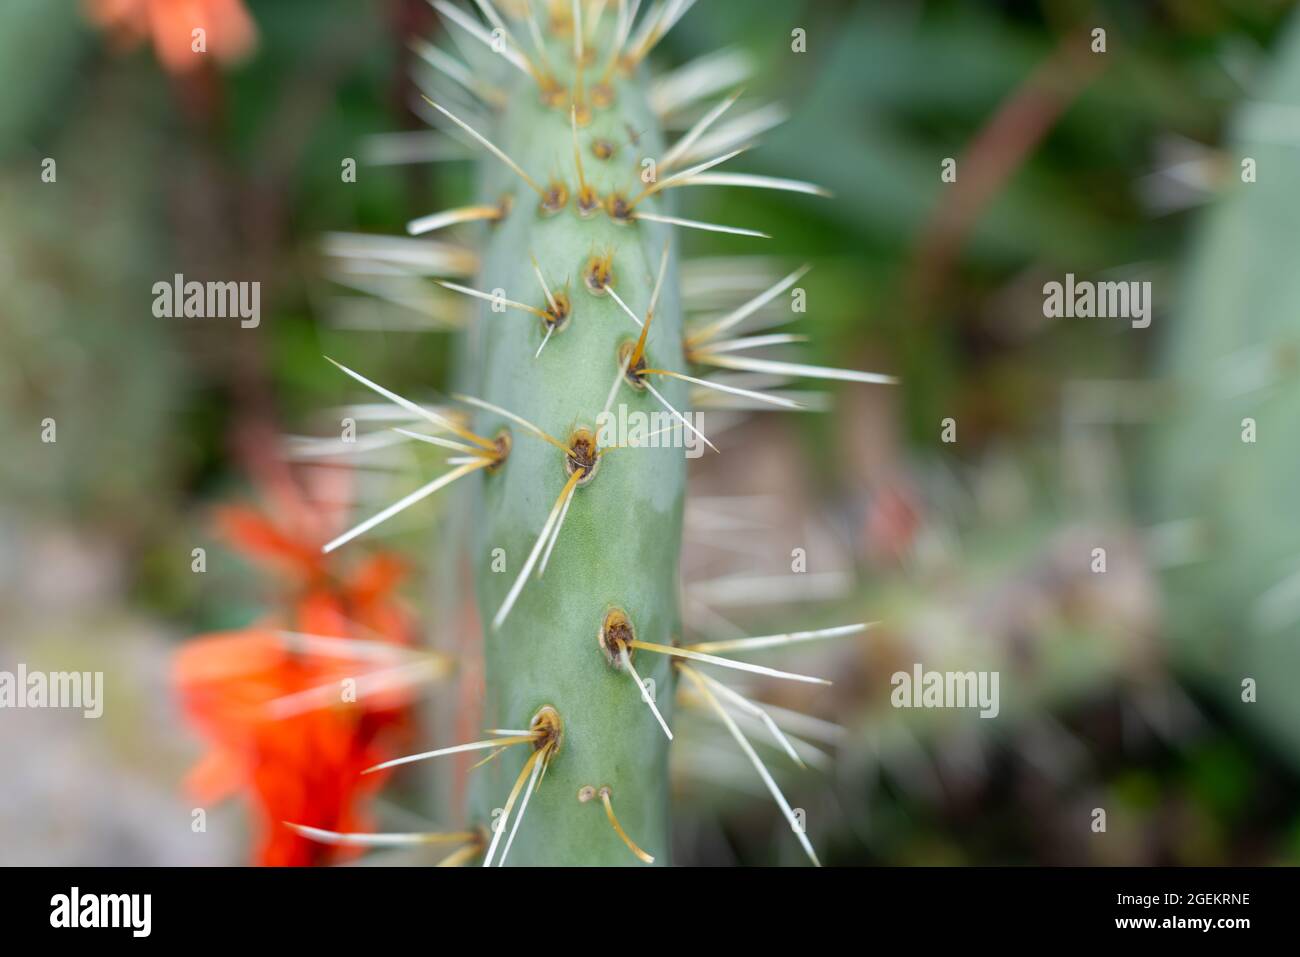 Prickly pear cactus leaf and spikes closeup in selective focus. Stock Photo